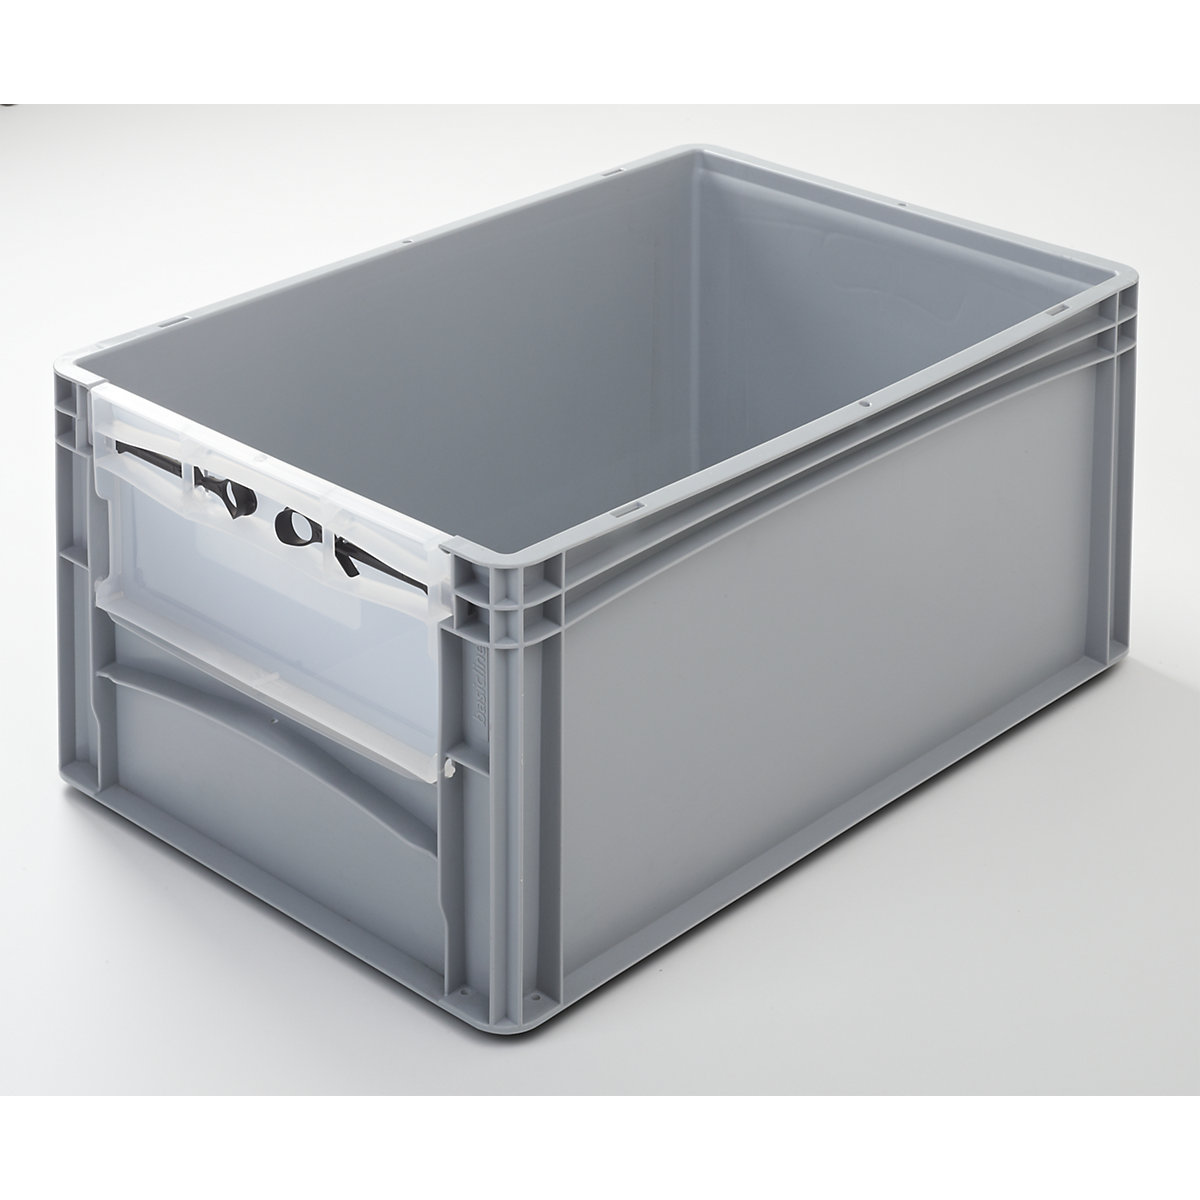 Euro size container, LxW 600 x 400 mm, with front flap, height 270 mm-4